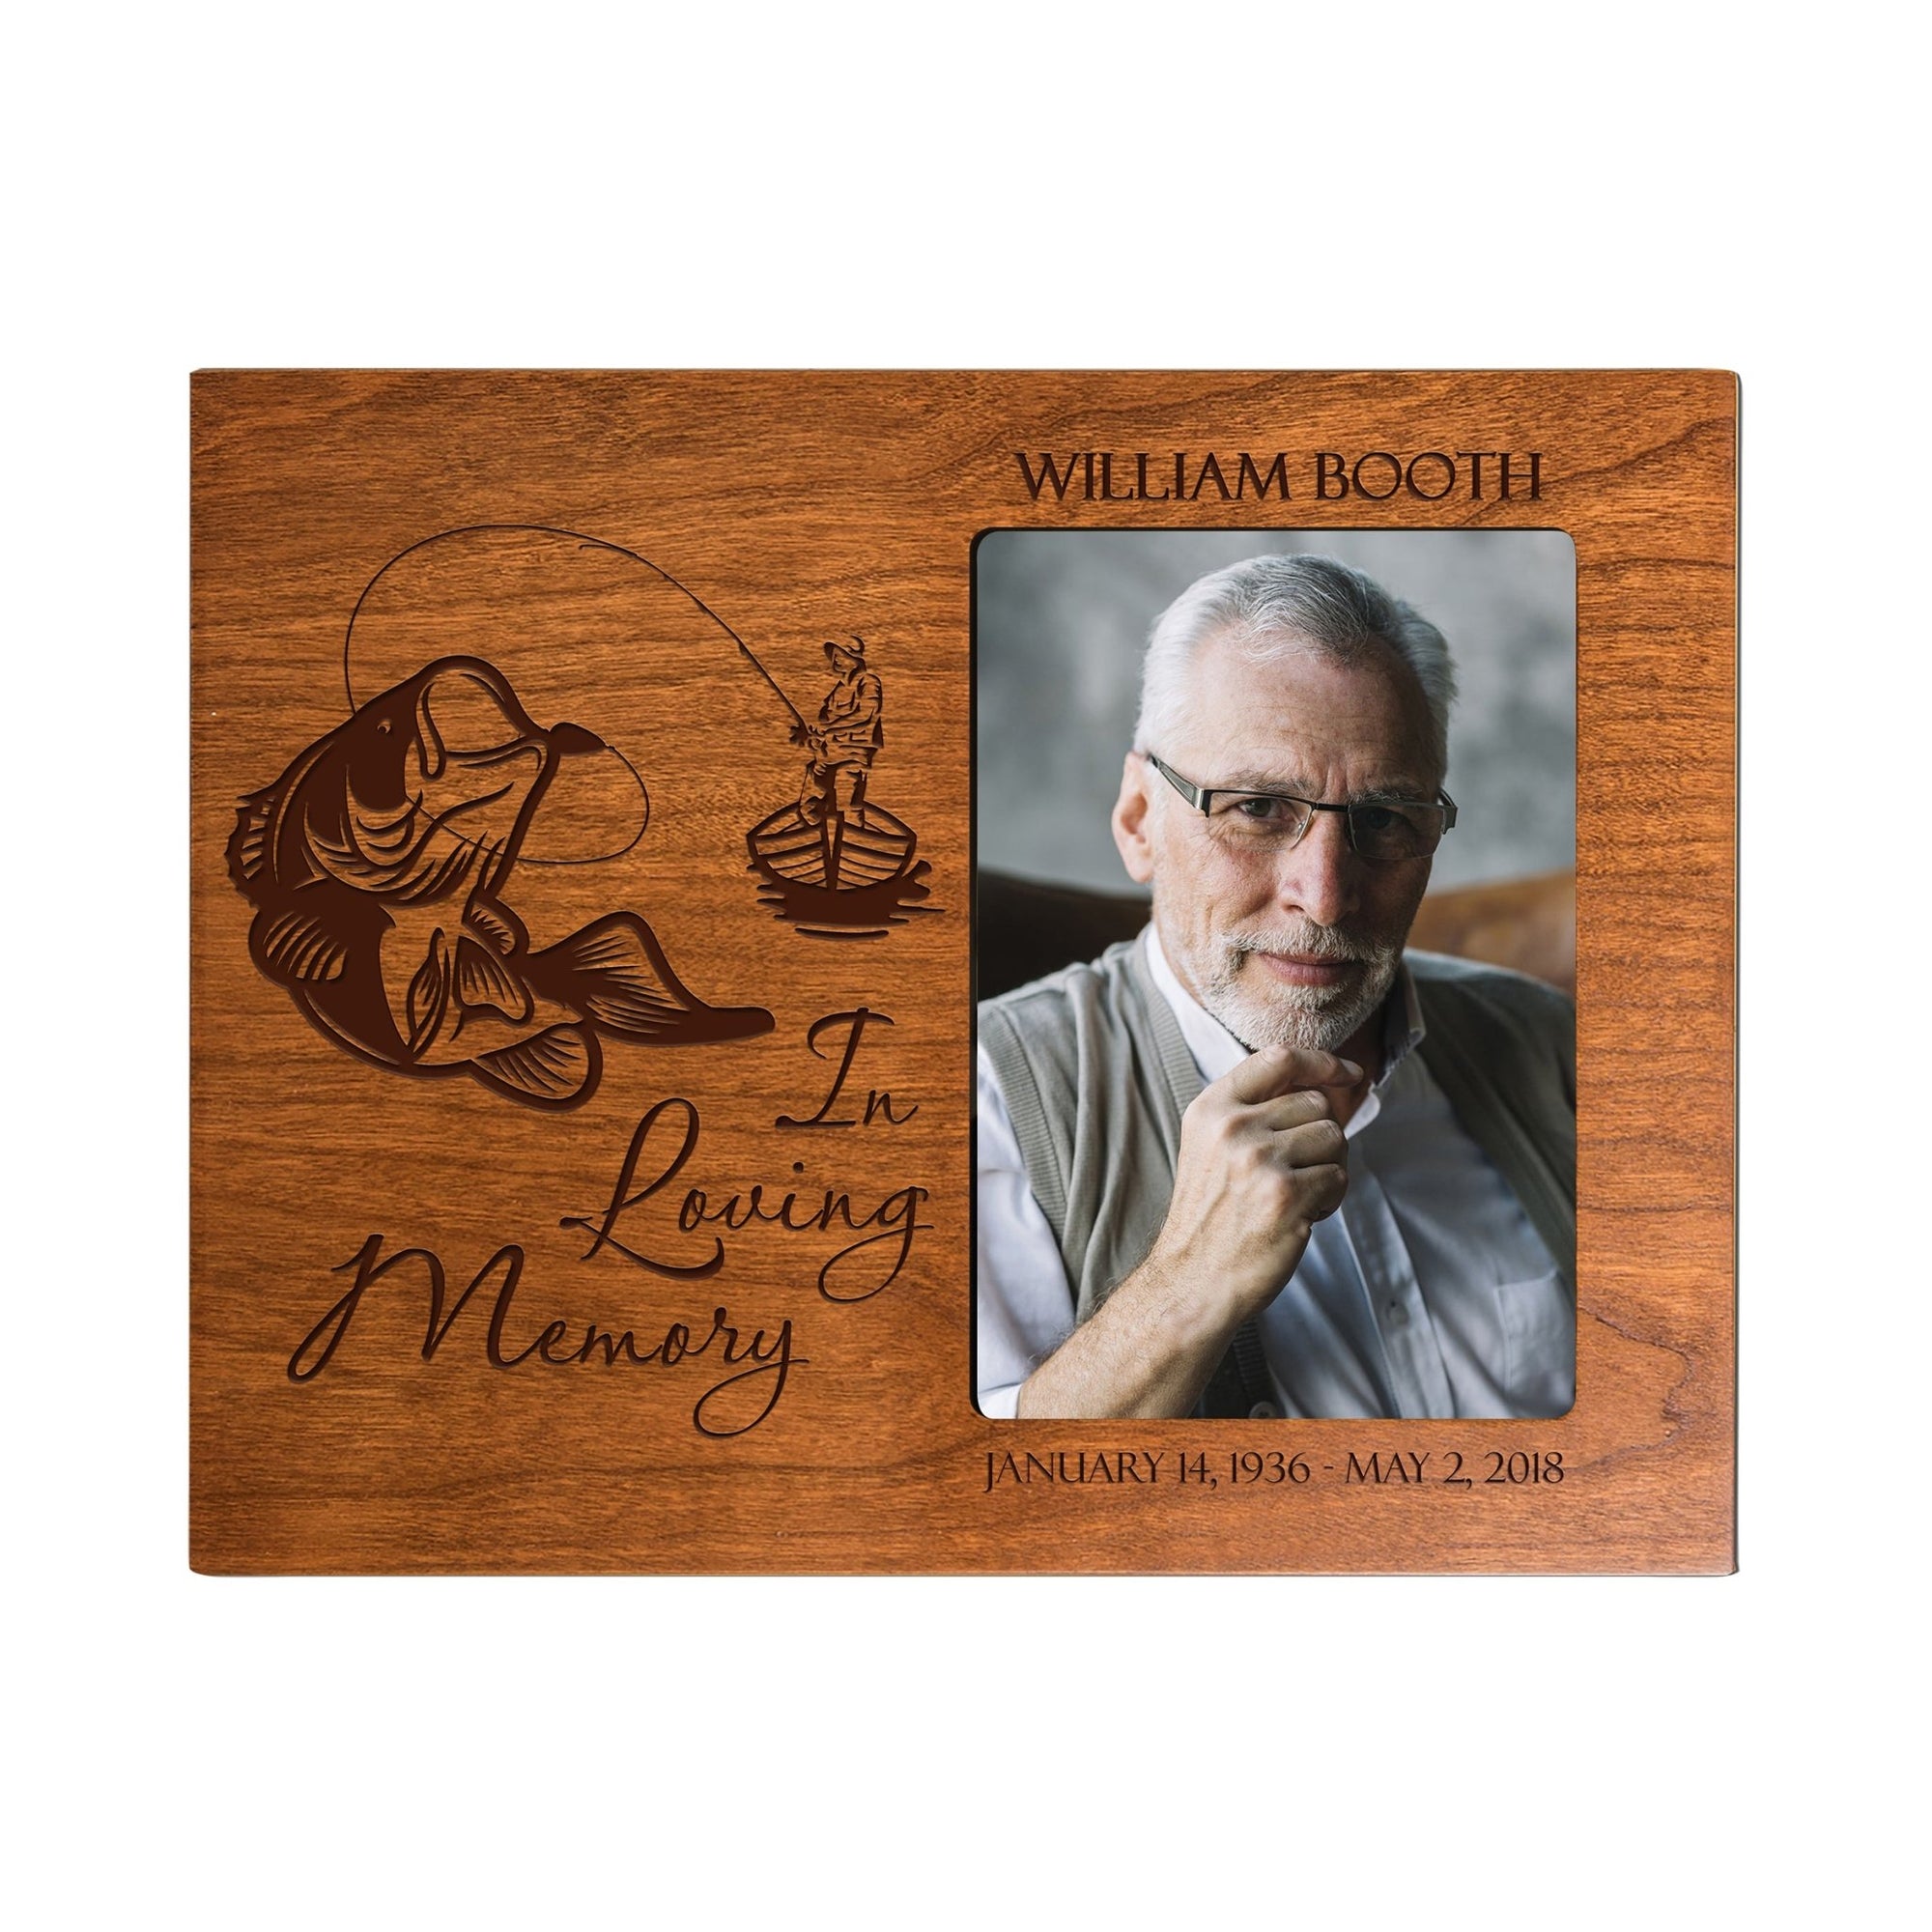 Personalized Wooden Memorial 8x10 Picture Frame holds 4x6 photo In Loving Memory (fisherman) - LifeSong Milestones